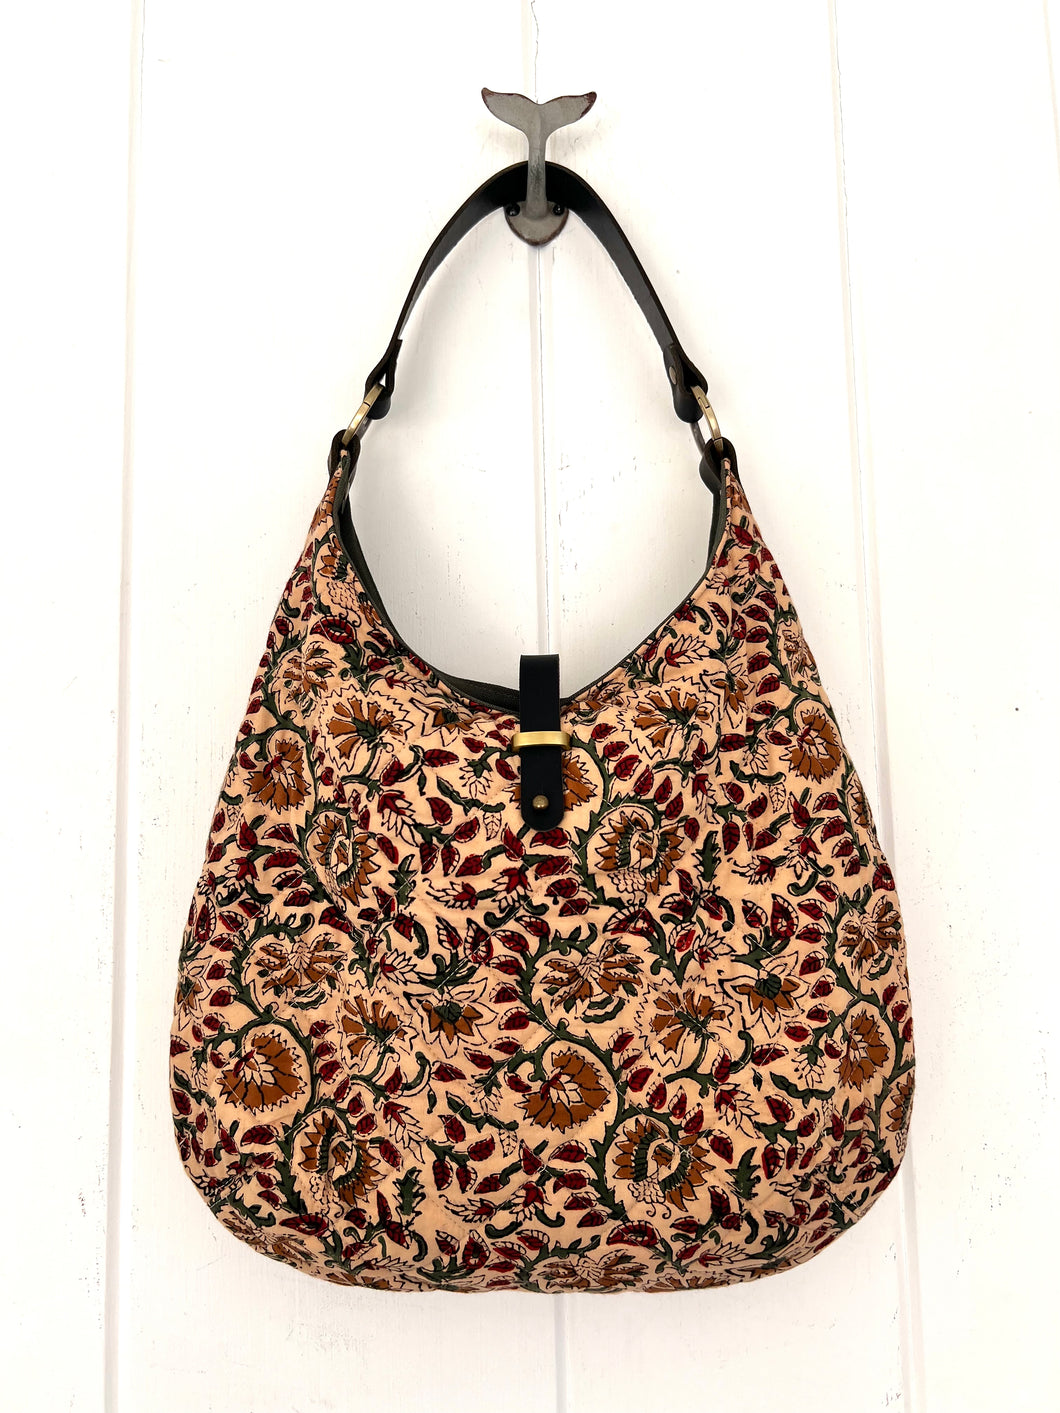 Marari Quilted Indian Cotton Hobo Bag